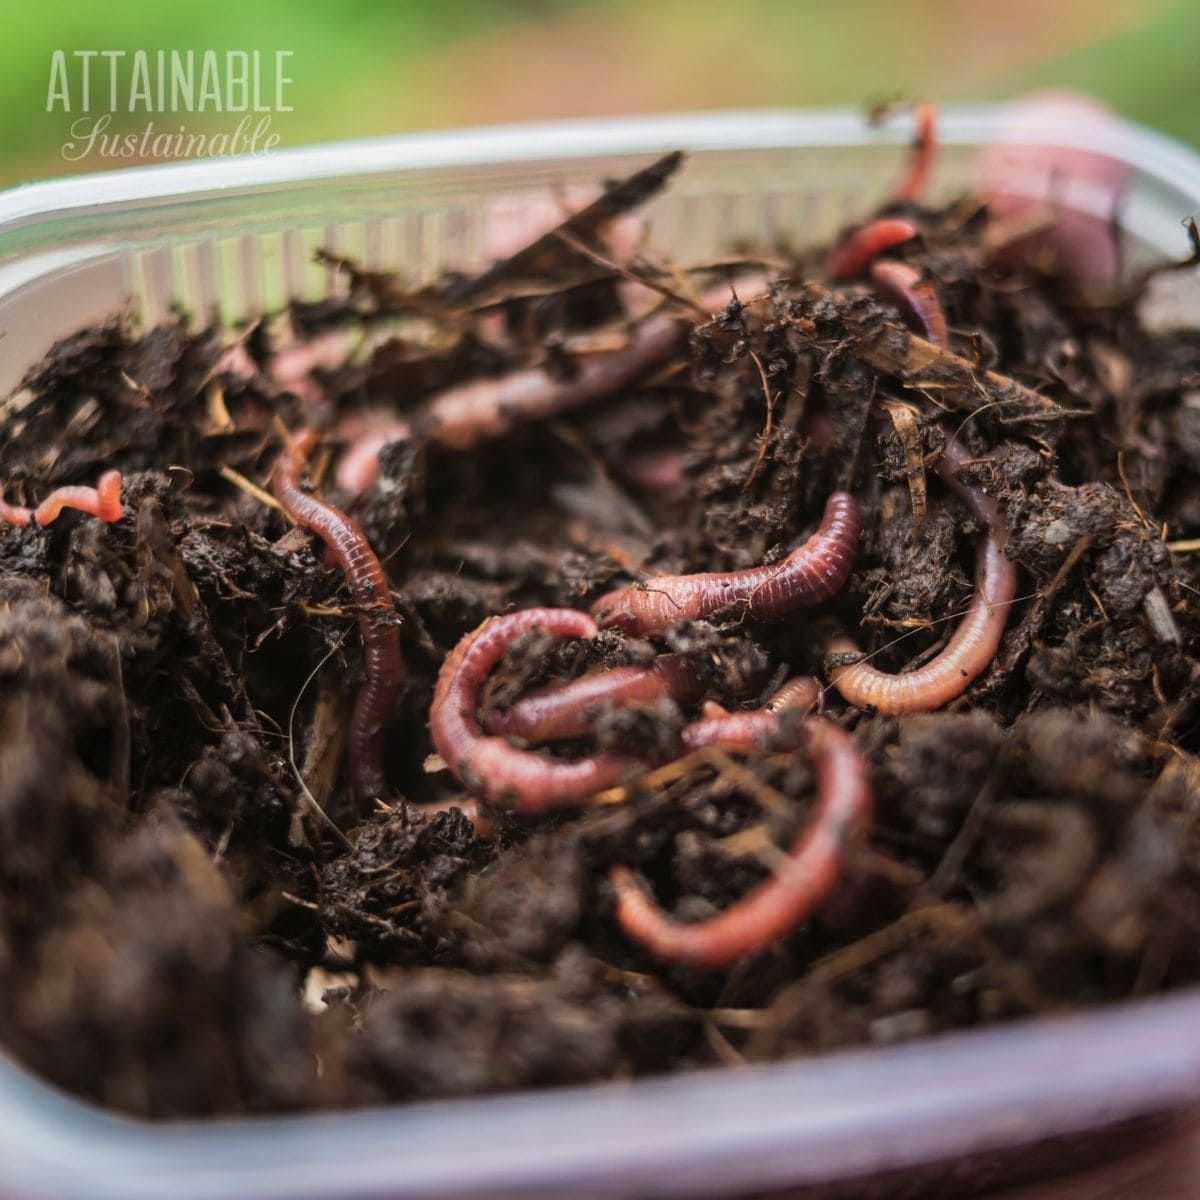 Easy ways to get started with composting! One of the easiest and low